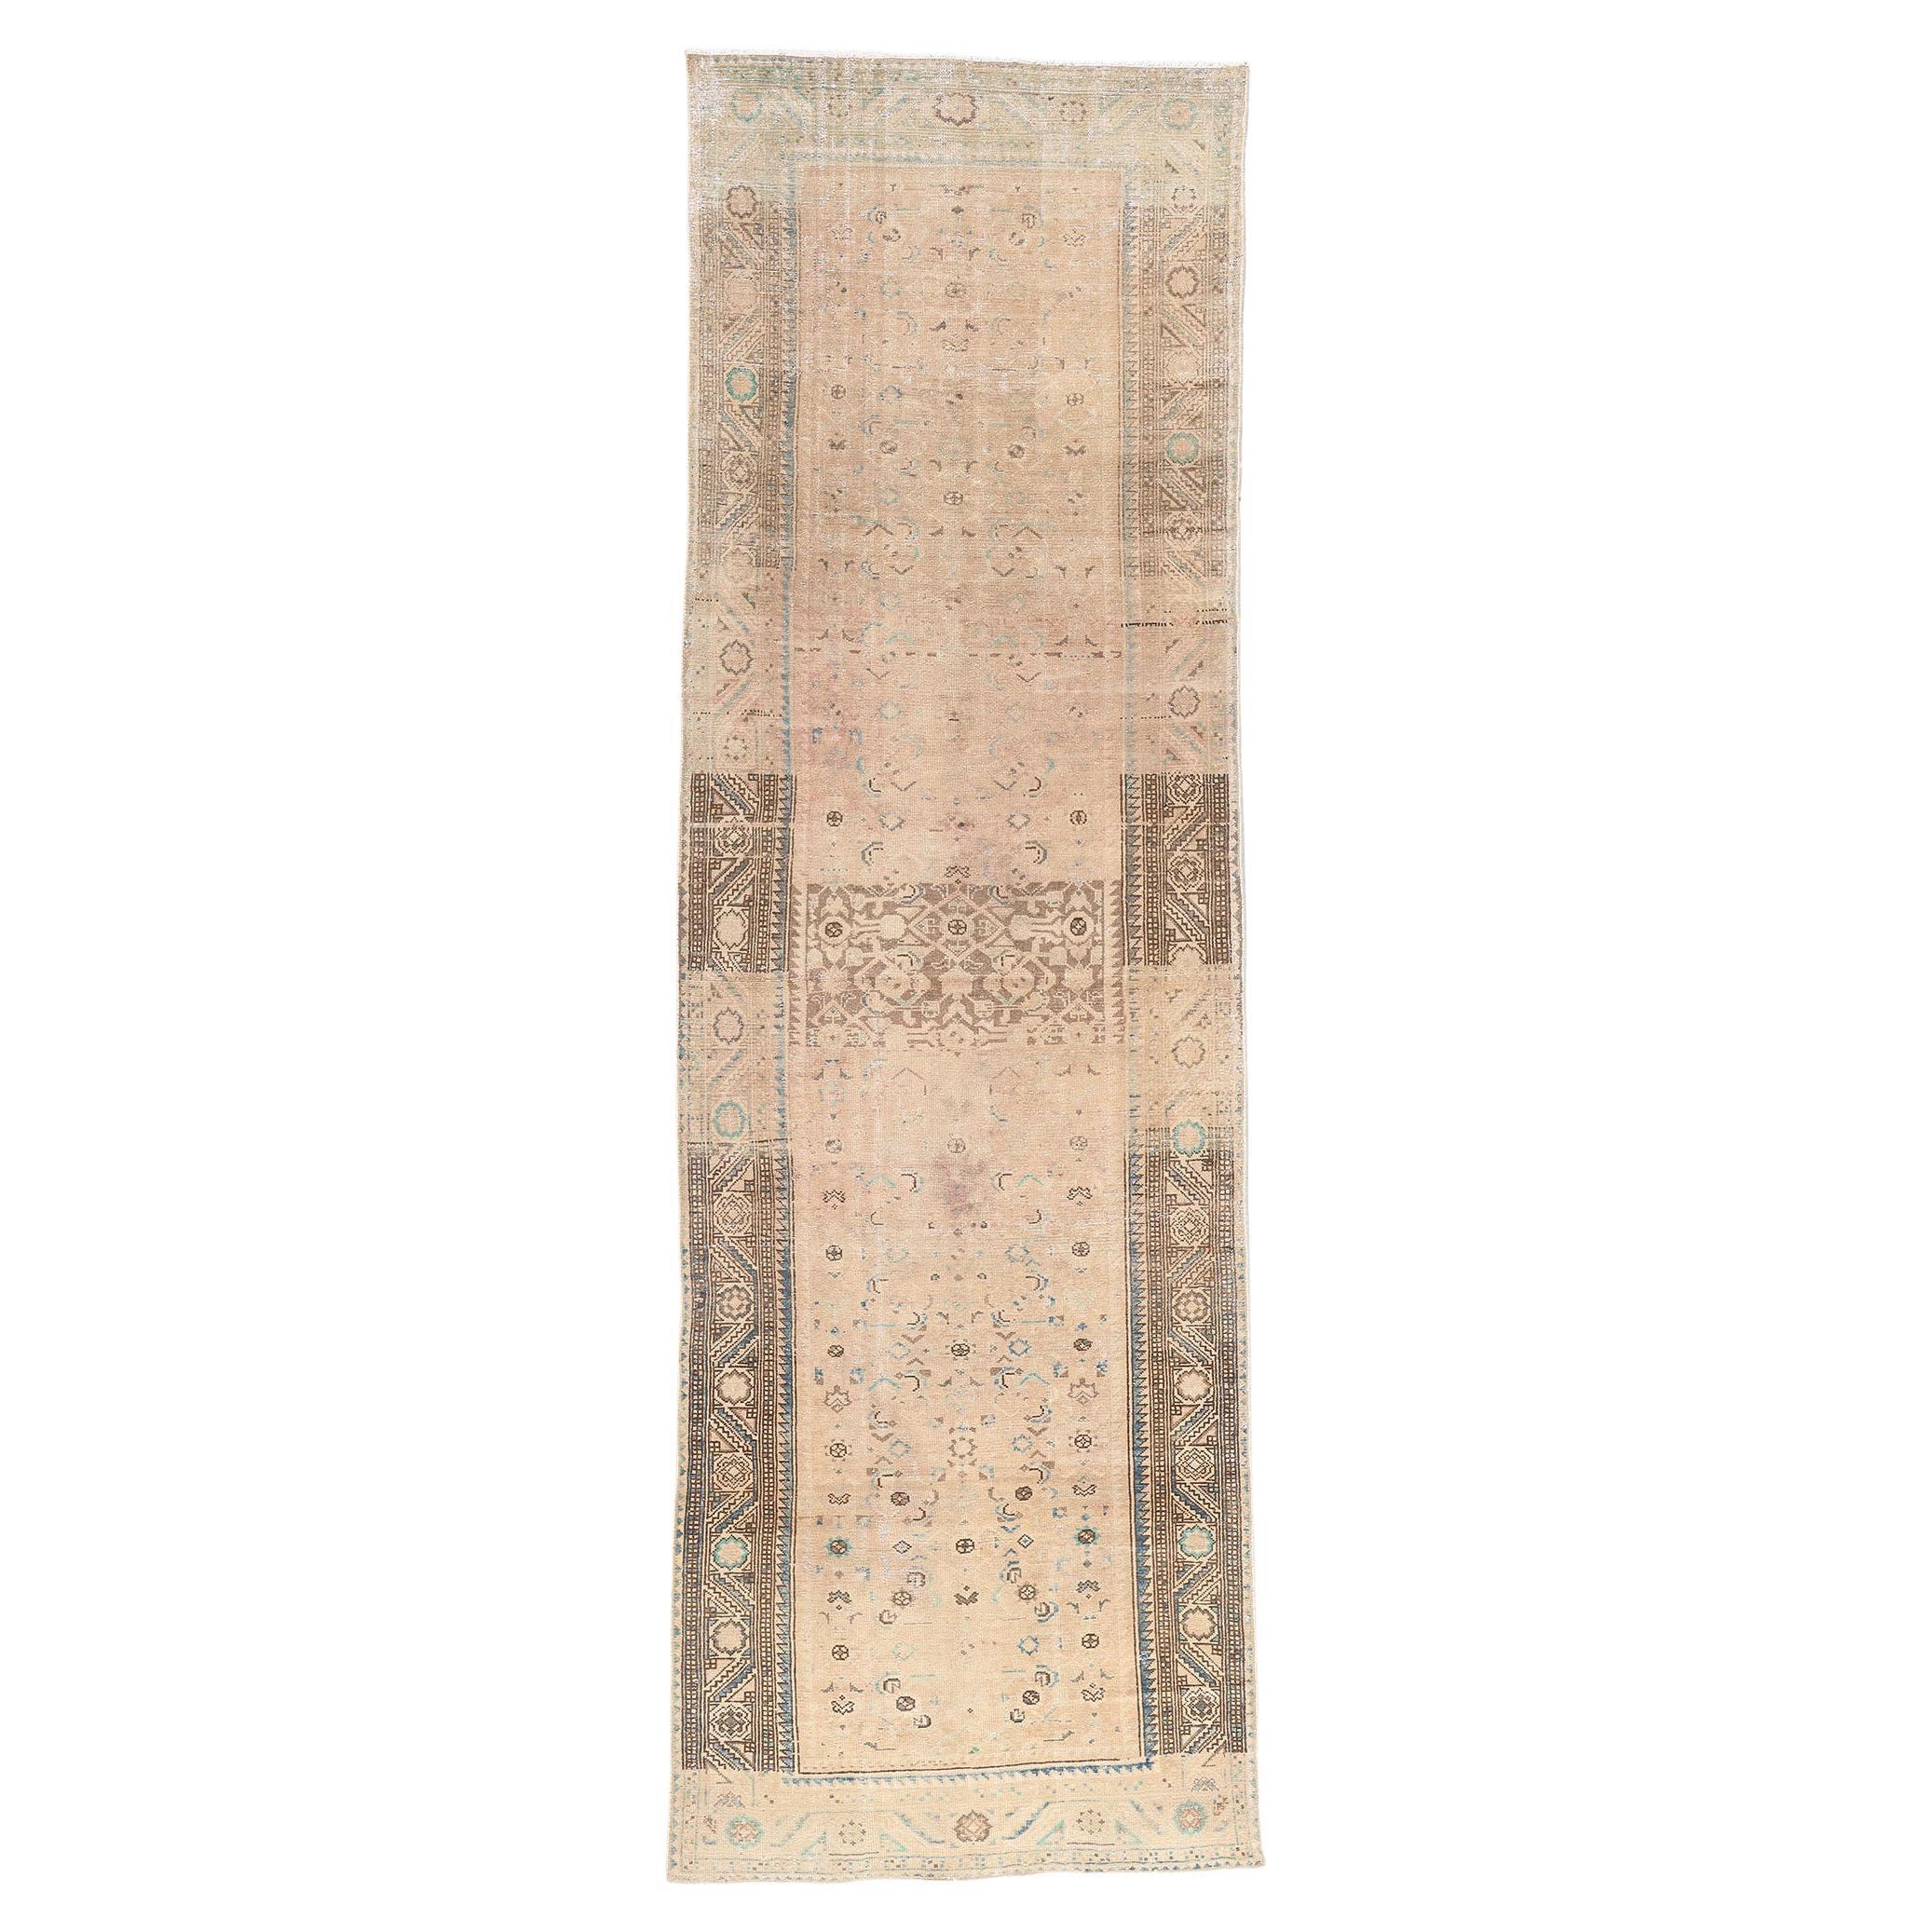 Vintage-Worn Persian Malayer Rug, Faded Elegance Meets Relaxed Refinement For Sale